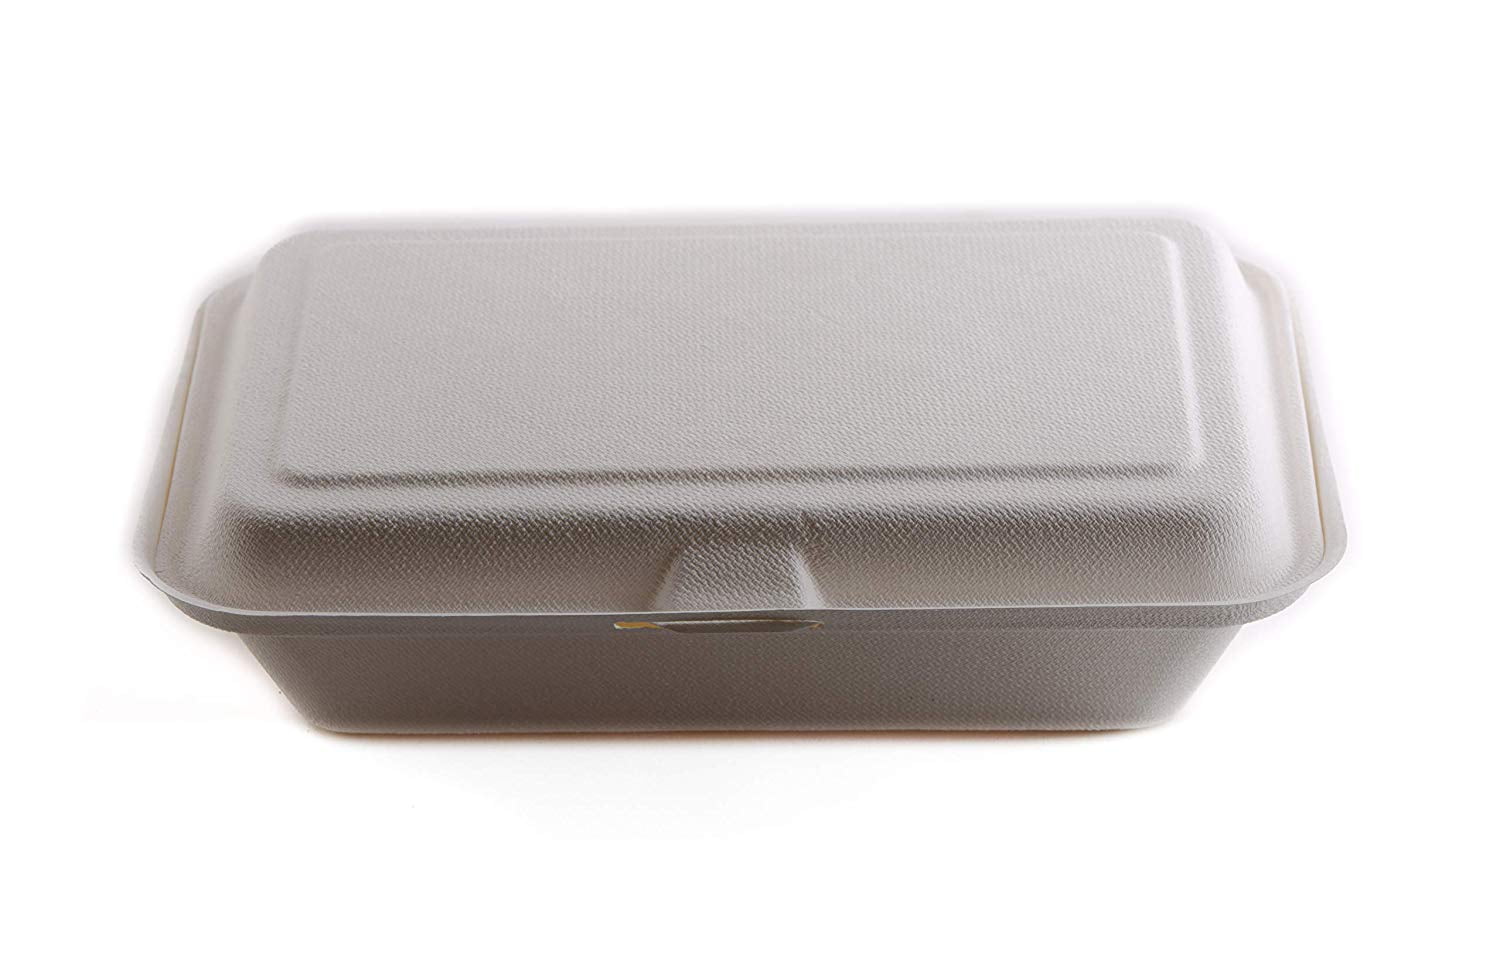 250 Count - Biodegradable 9x9 Take Out Food Containers with Clamshell  Hinged Lid - Eco Friendly Sugarcane Bagasse 100% Compostable, Recyclable,  ToGo